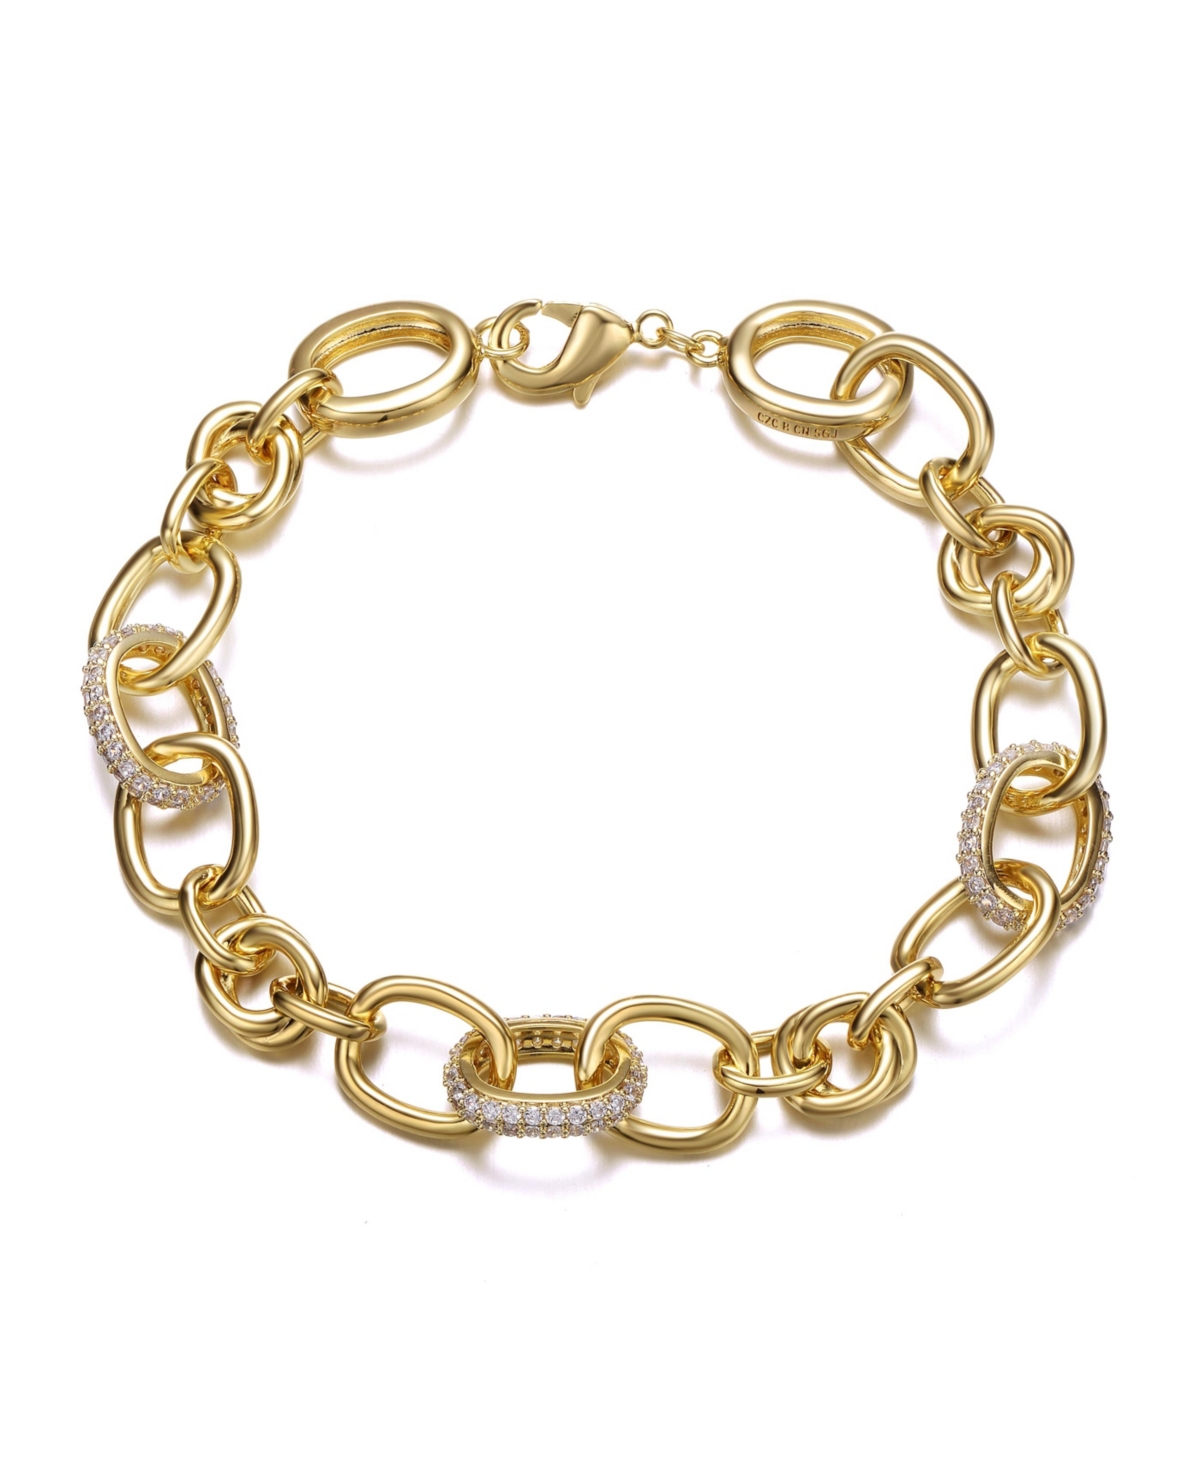 RACHEL GLAUBER 14K YELLOW GOLD PLATED WITH CUBIC ZIRCONIA TUBULAR CABLE LINK LOVE KNOT BRACELET.